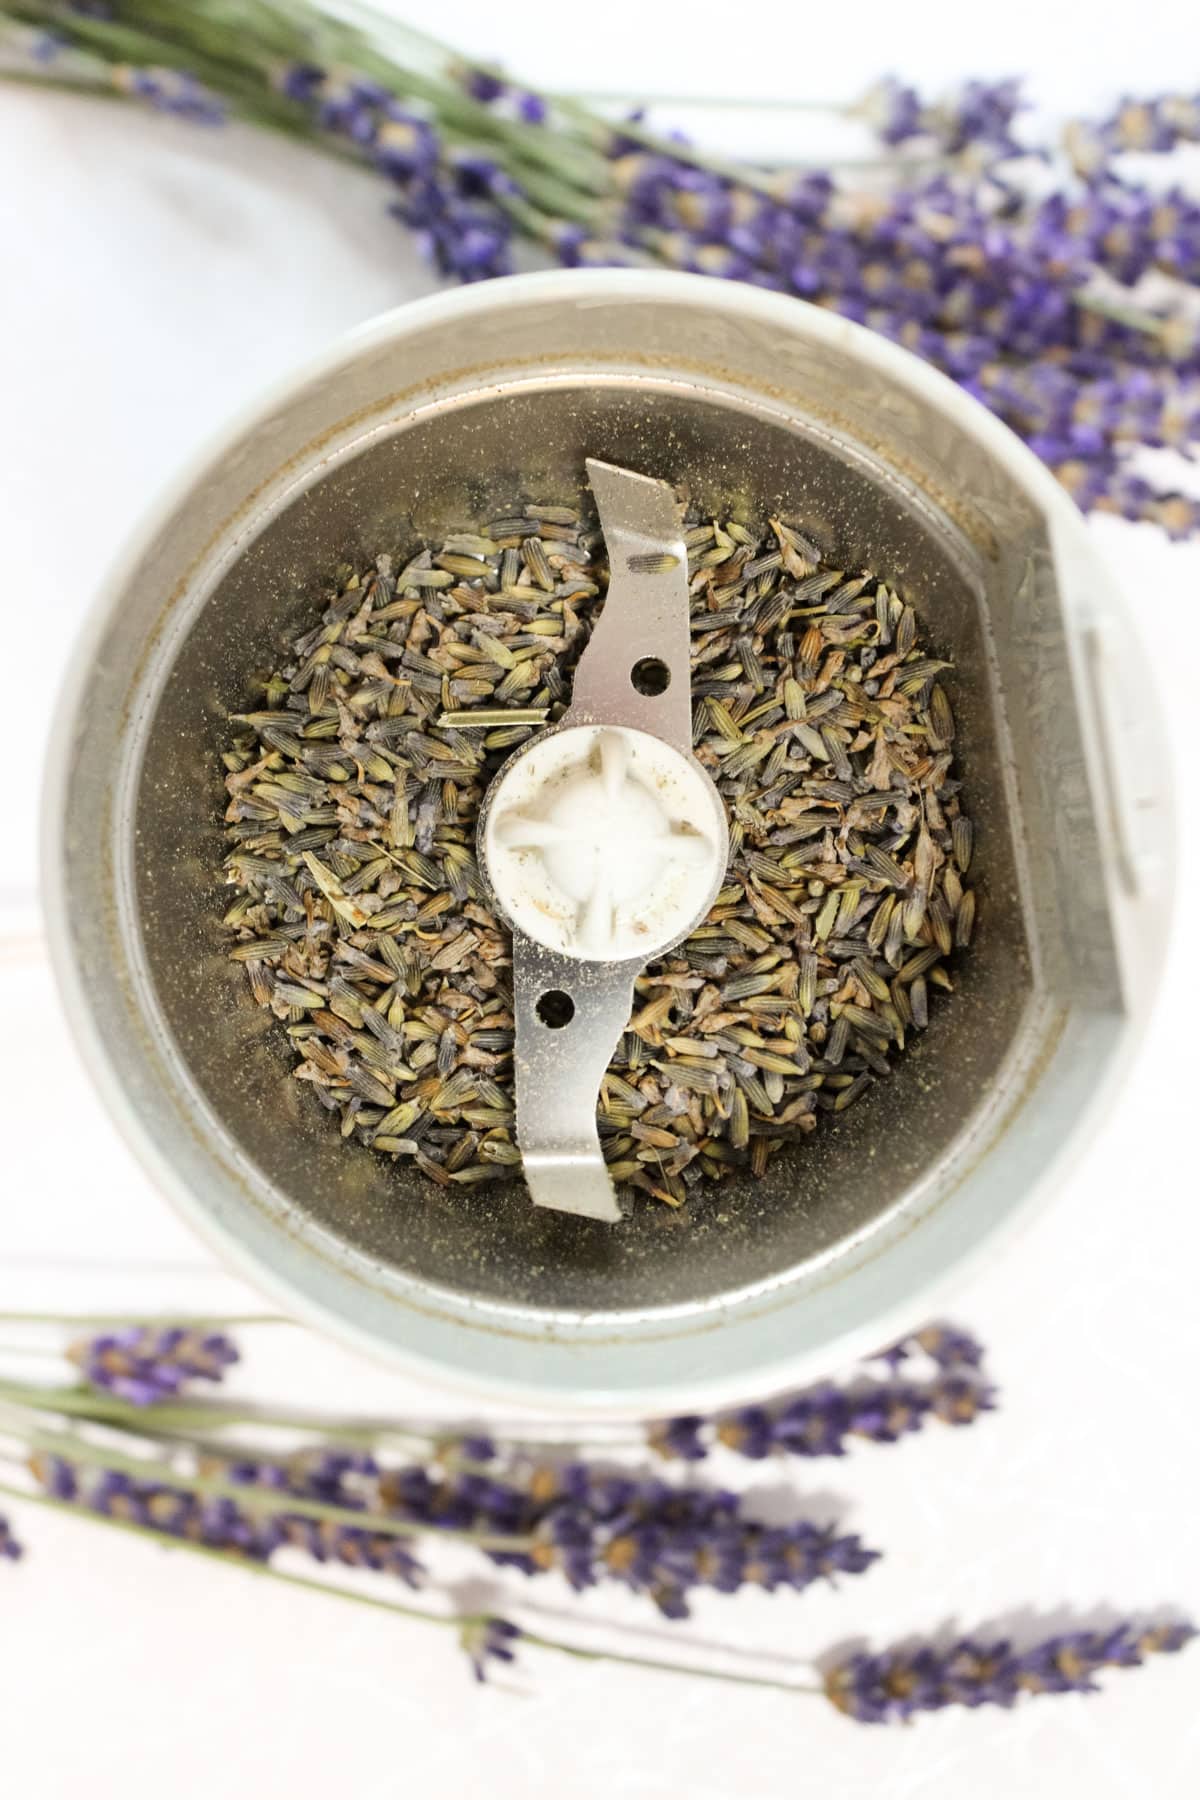 Culinary lavender in a spice grinder,